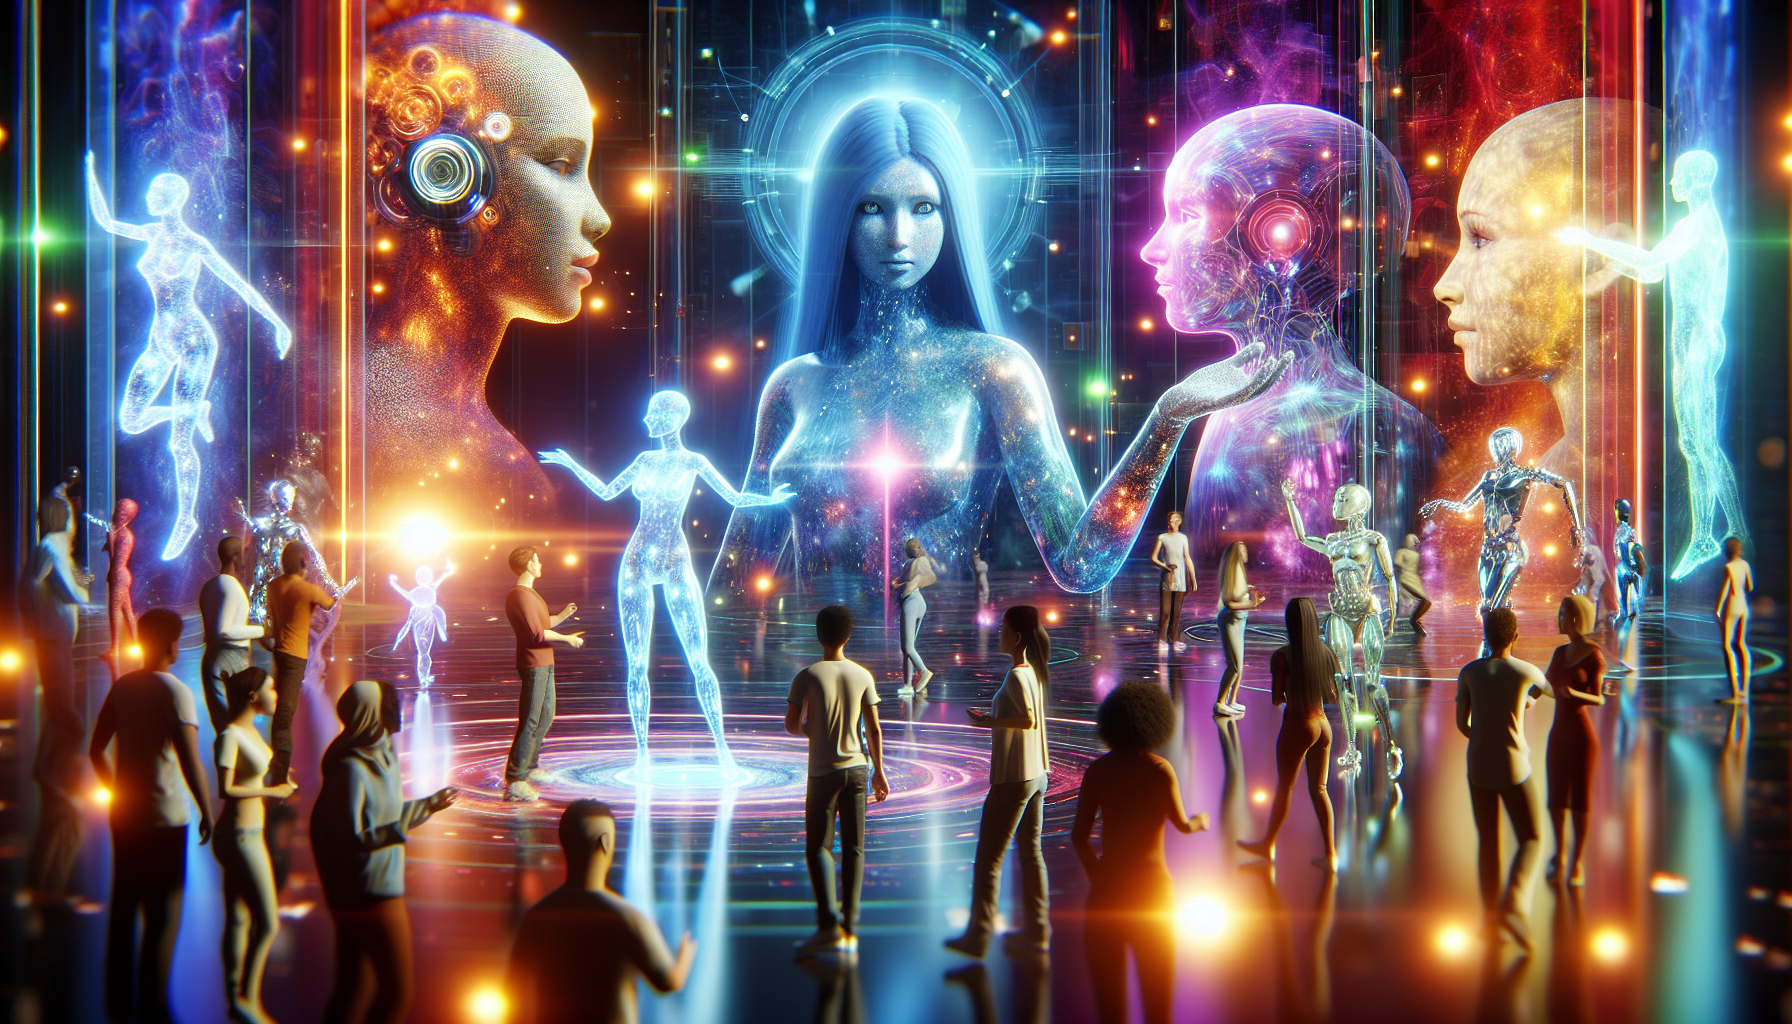 Illustration of AI avatars interacting with human beings